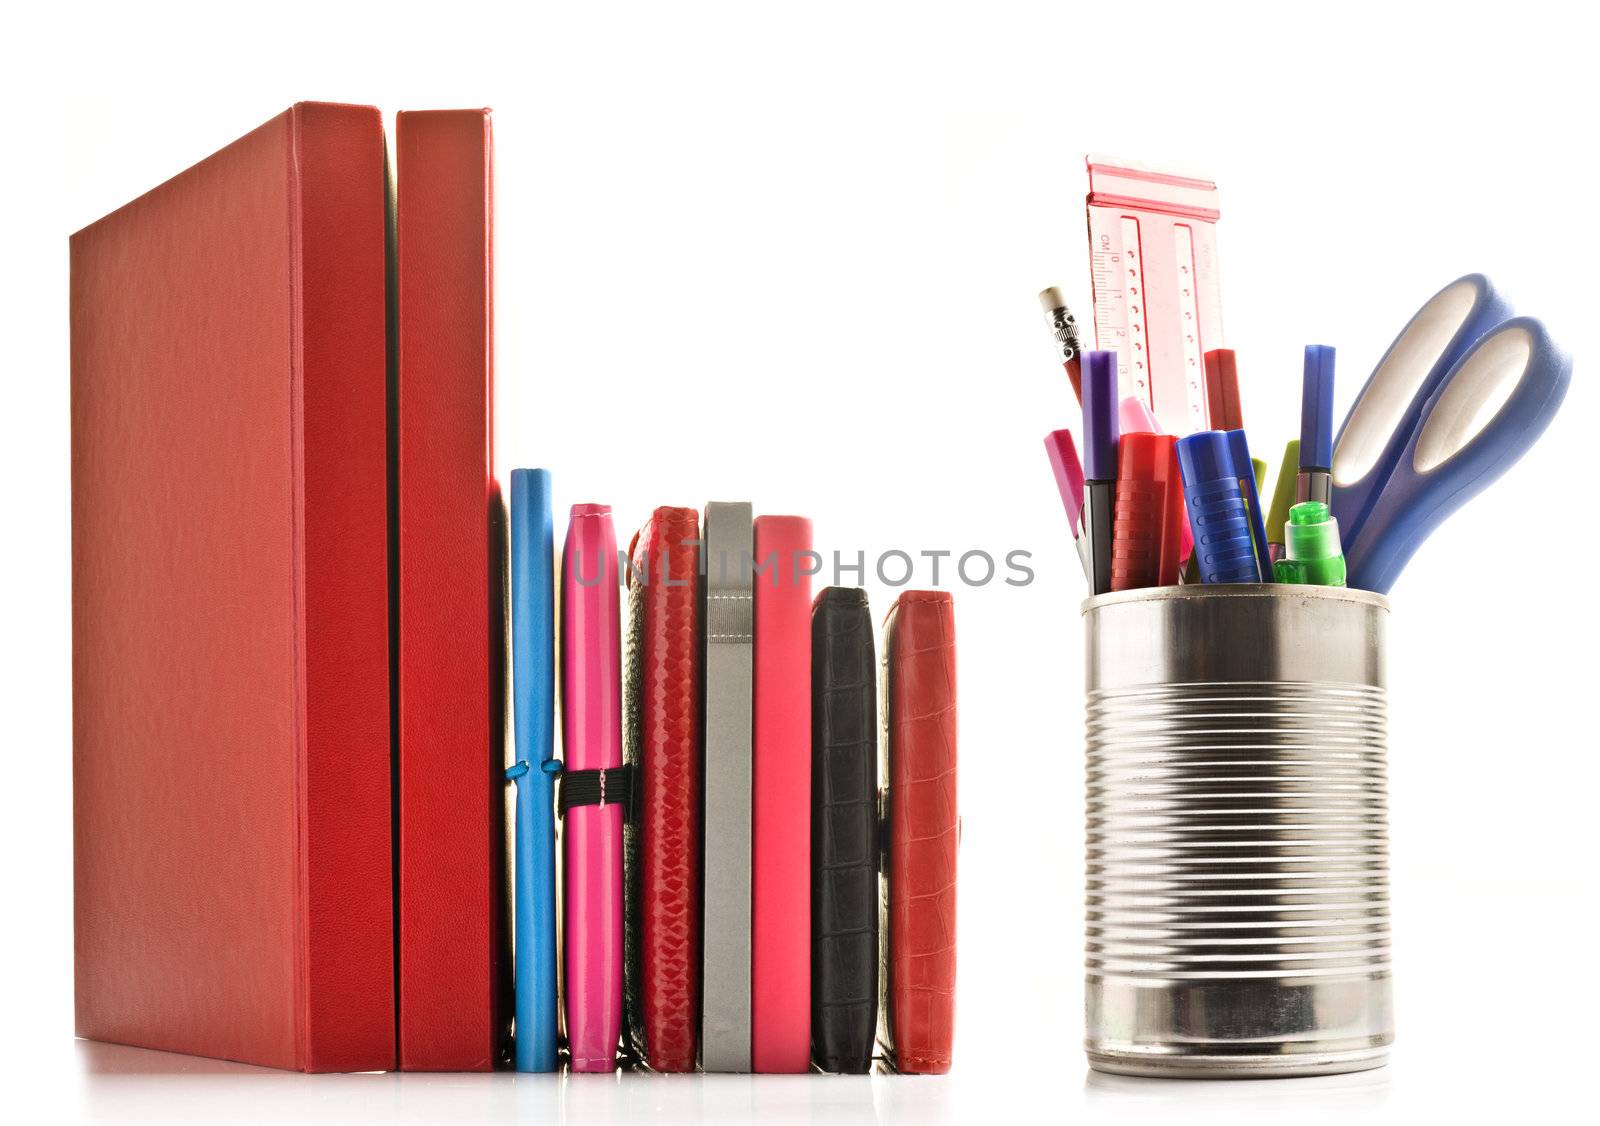 Stationery and books on white background by tish1